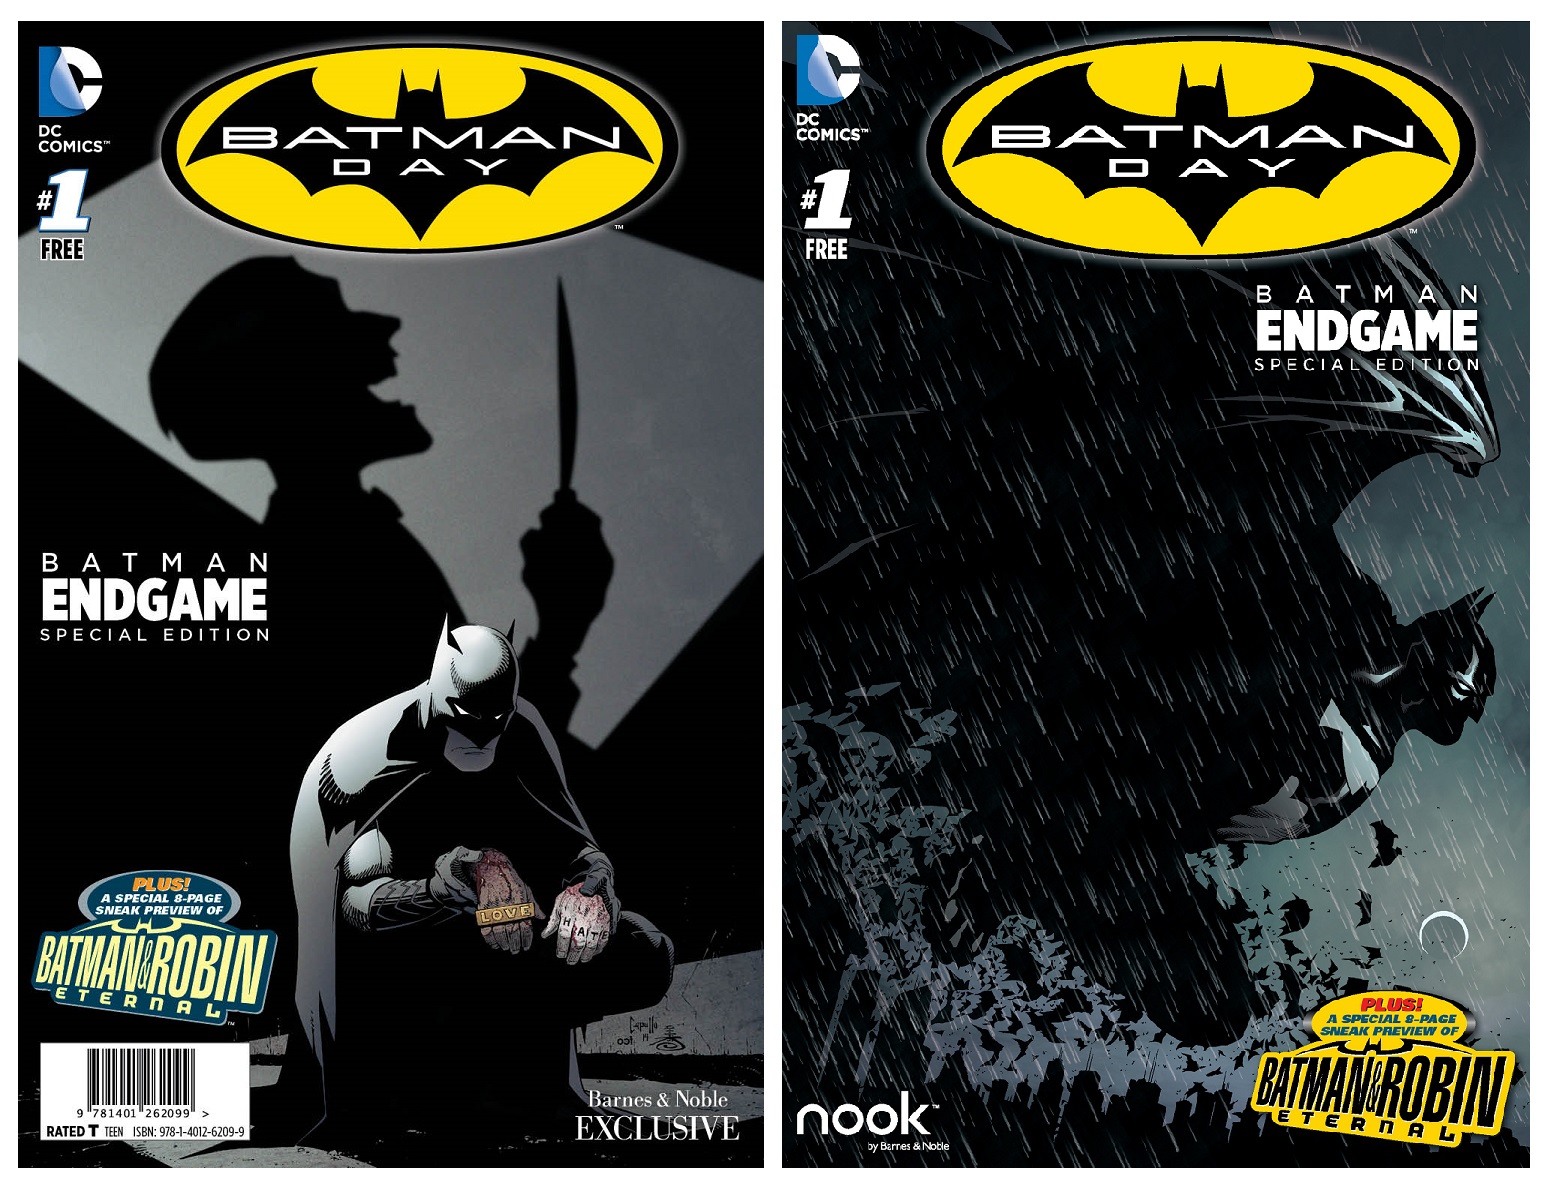 AICN COMICS EXCLUSIVE: Do these two new BATMAN: ENDGAME covers  commemorating Batman Day (September 2